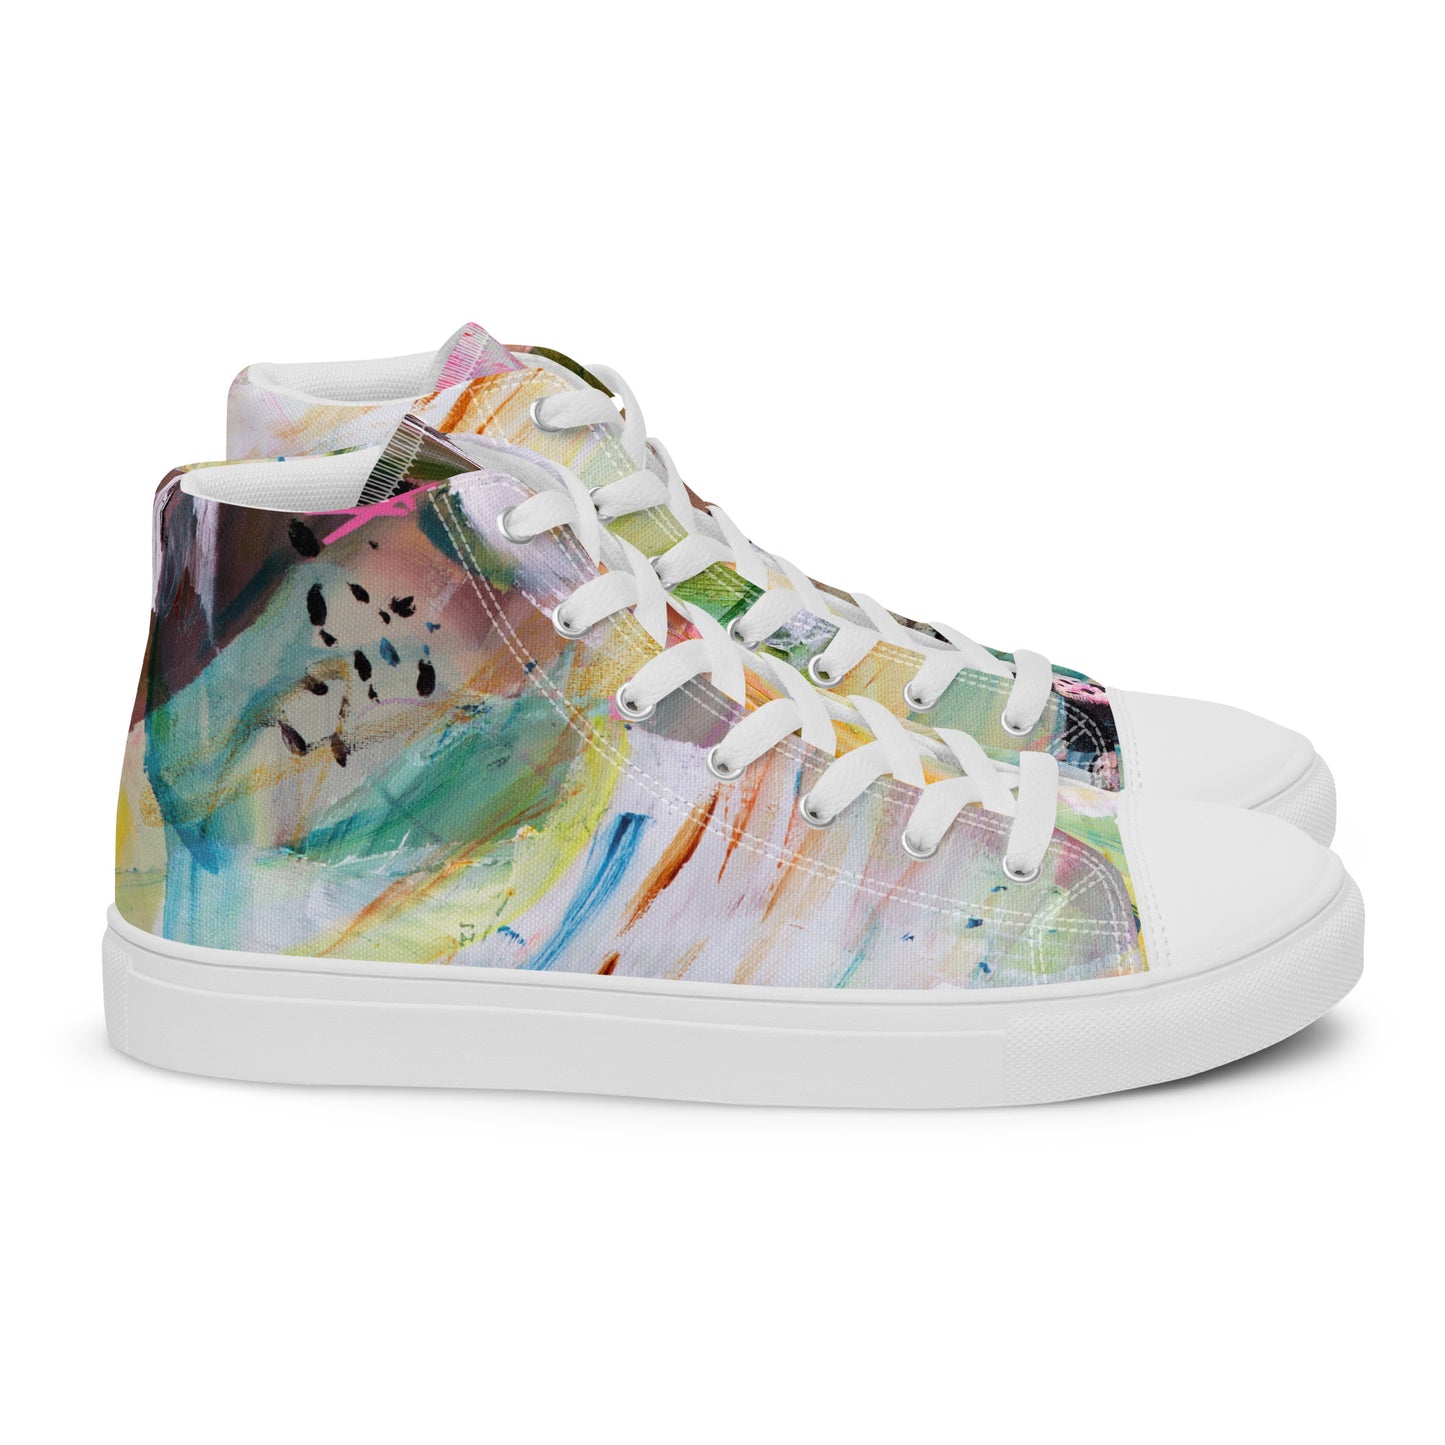 Wandering by Sara Franklin | Women’s high top canvas shoes